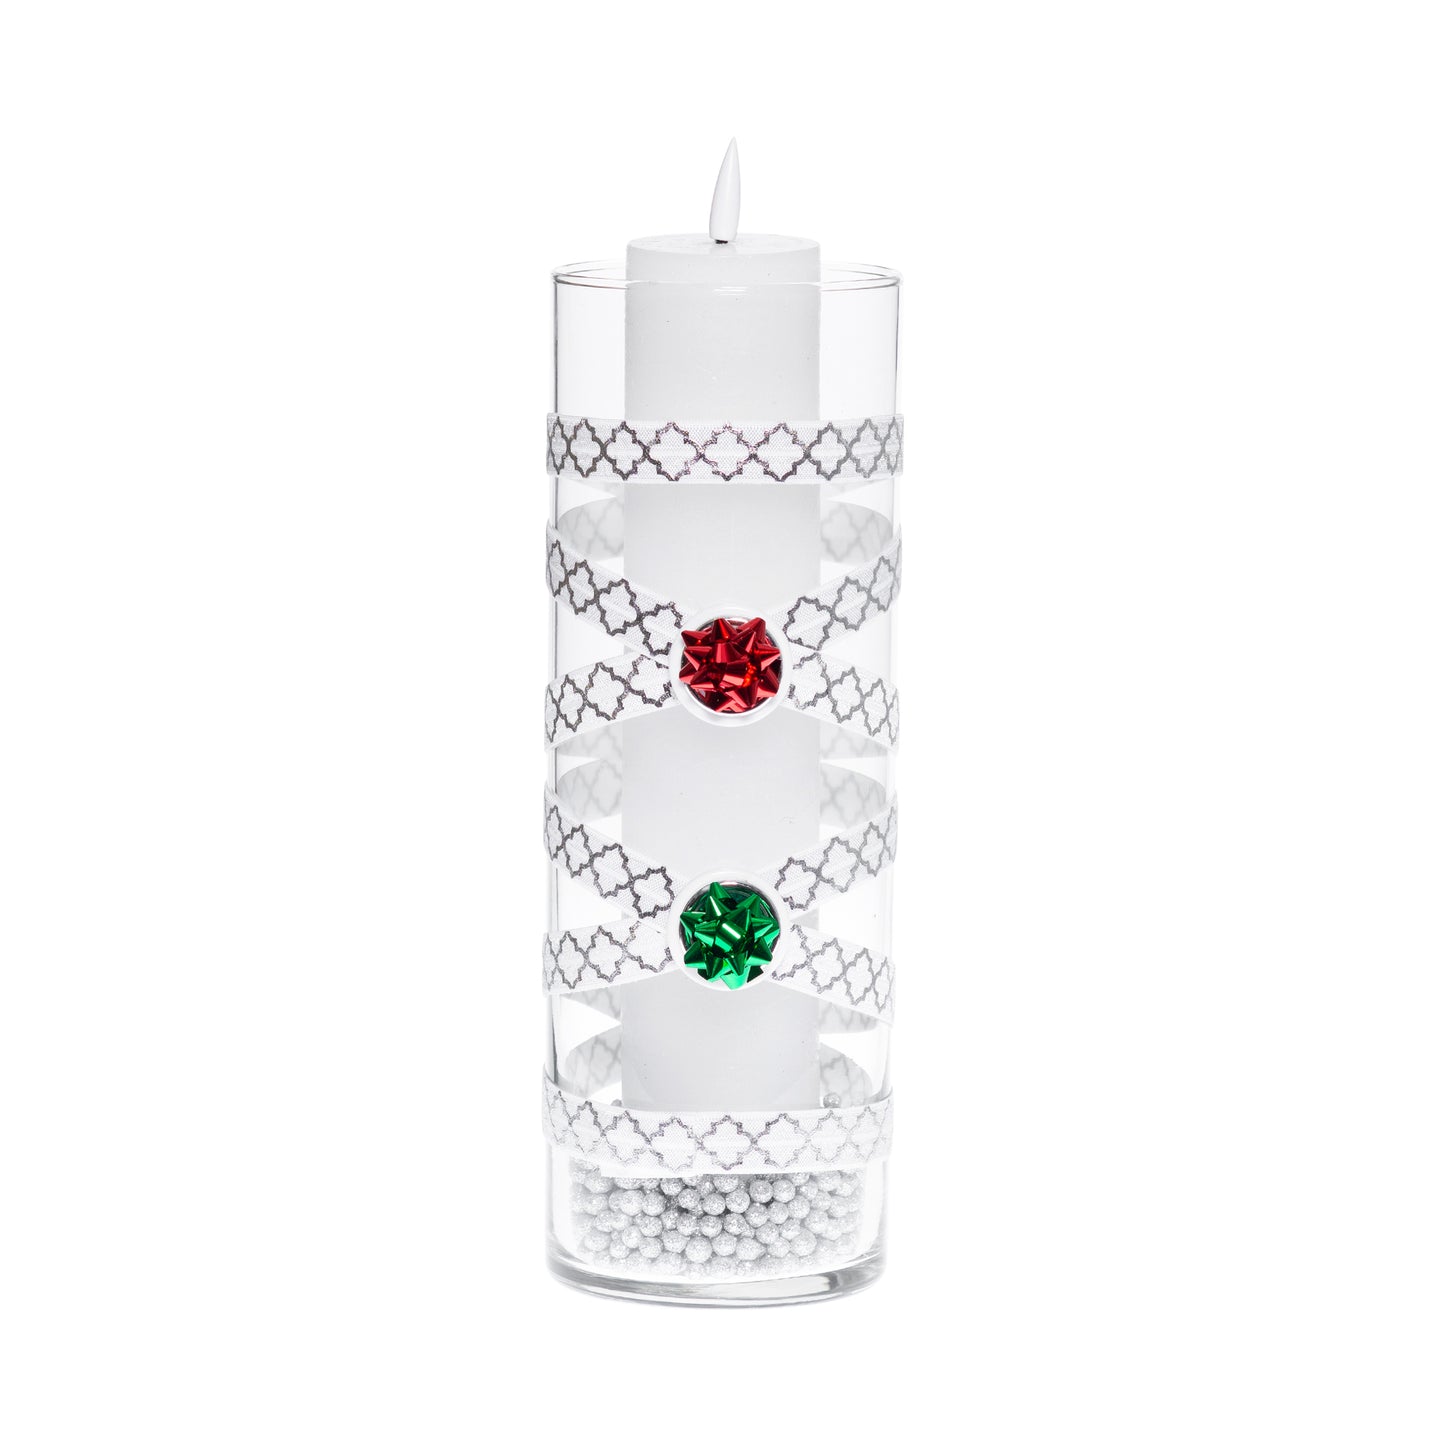 3.5" x 9.5" Vase White Silver Quatrefoil 5X 6 Red Green Shiny Bows Holiday Collection Complete Set FREE SHIPPING